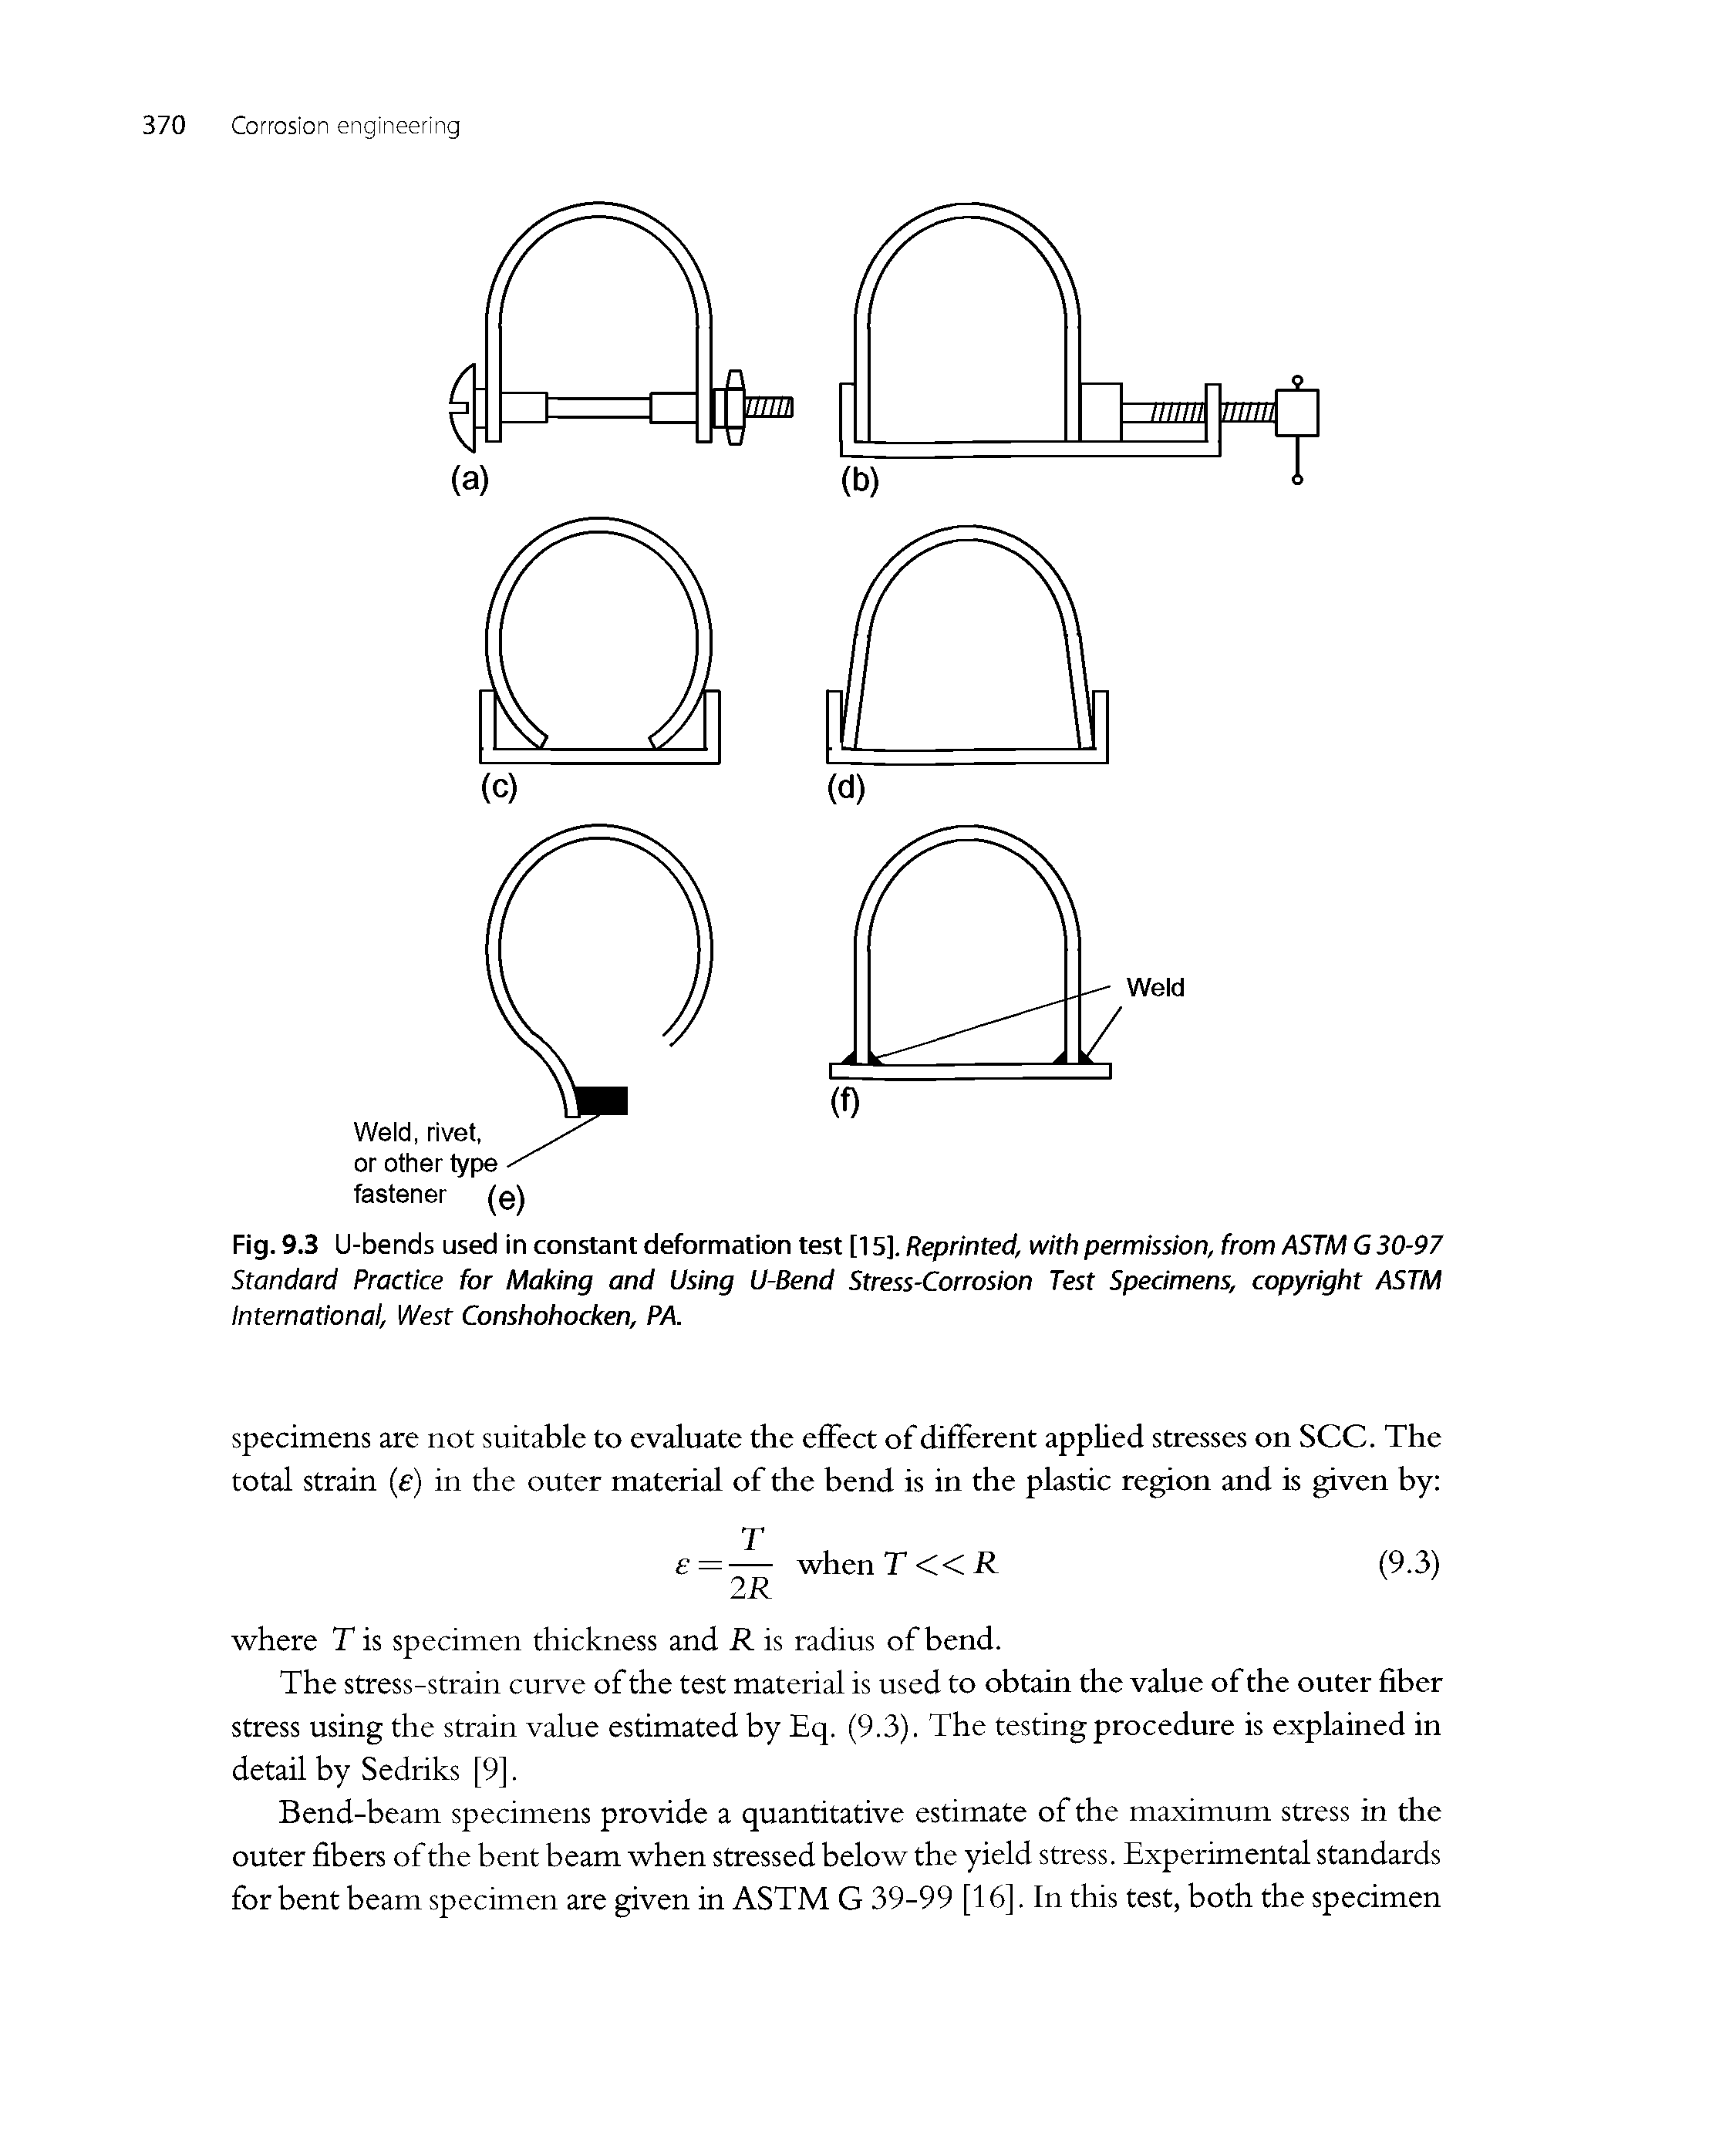 Fig. 9.3 U-bends used in constant deformation test [15], Reprinted, with permission, from ASTM G 30-97 Standard Practice for Making and Using U-Bend Stress-Corrosion Test Specimens, copyright ASTM International, West Conshohocken, PA.